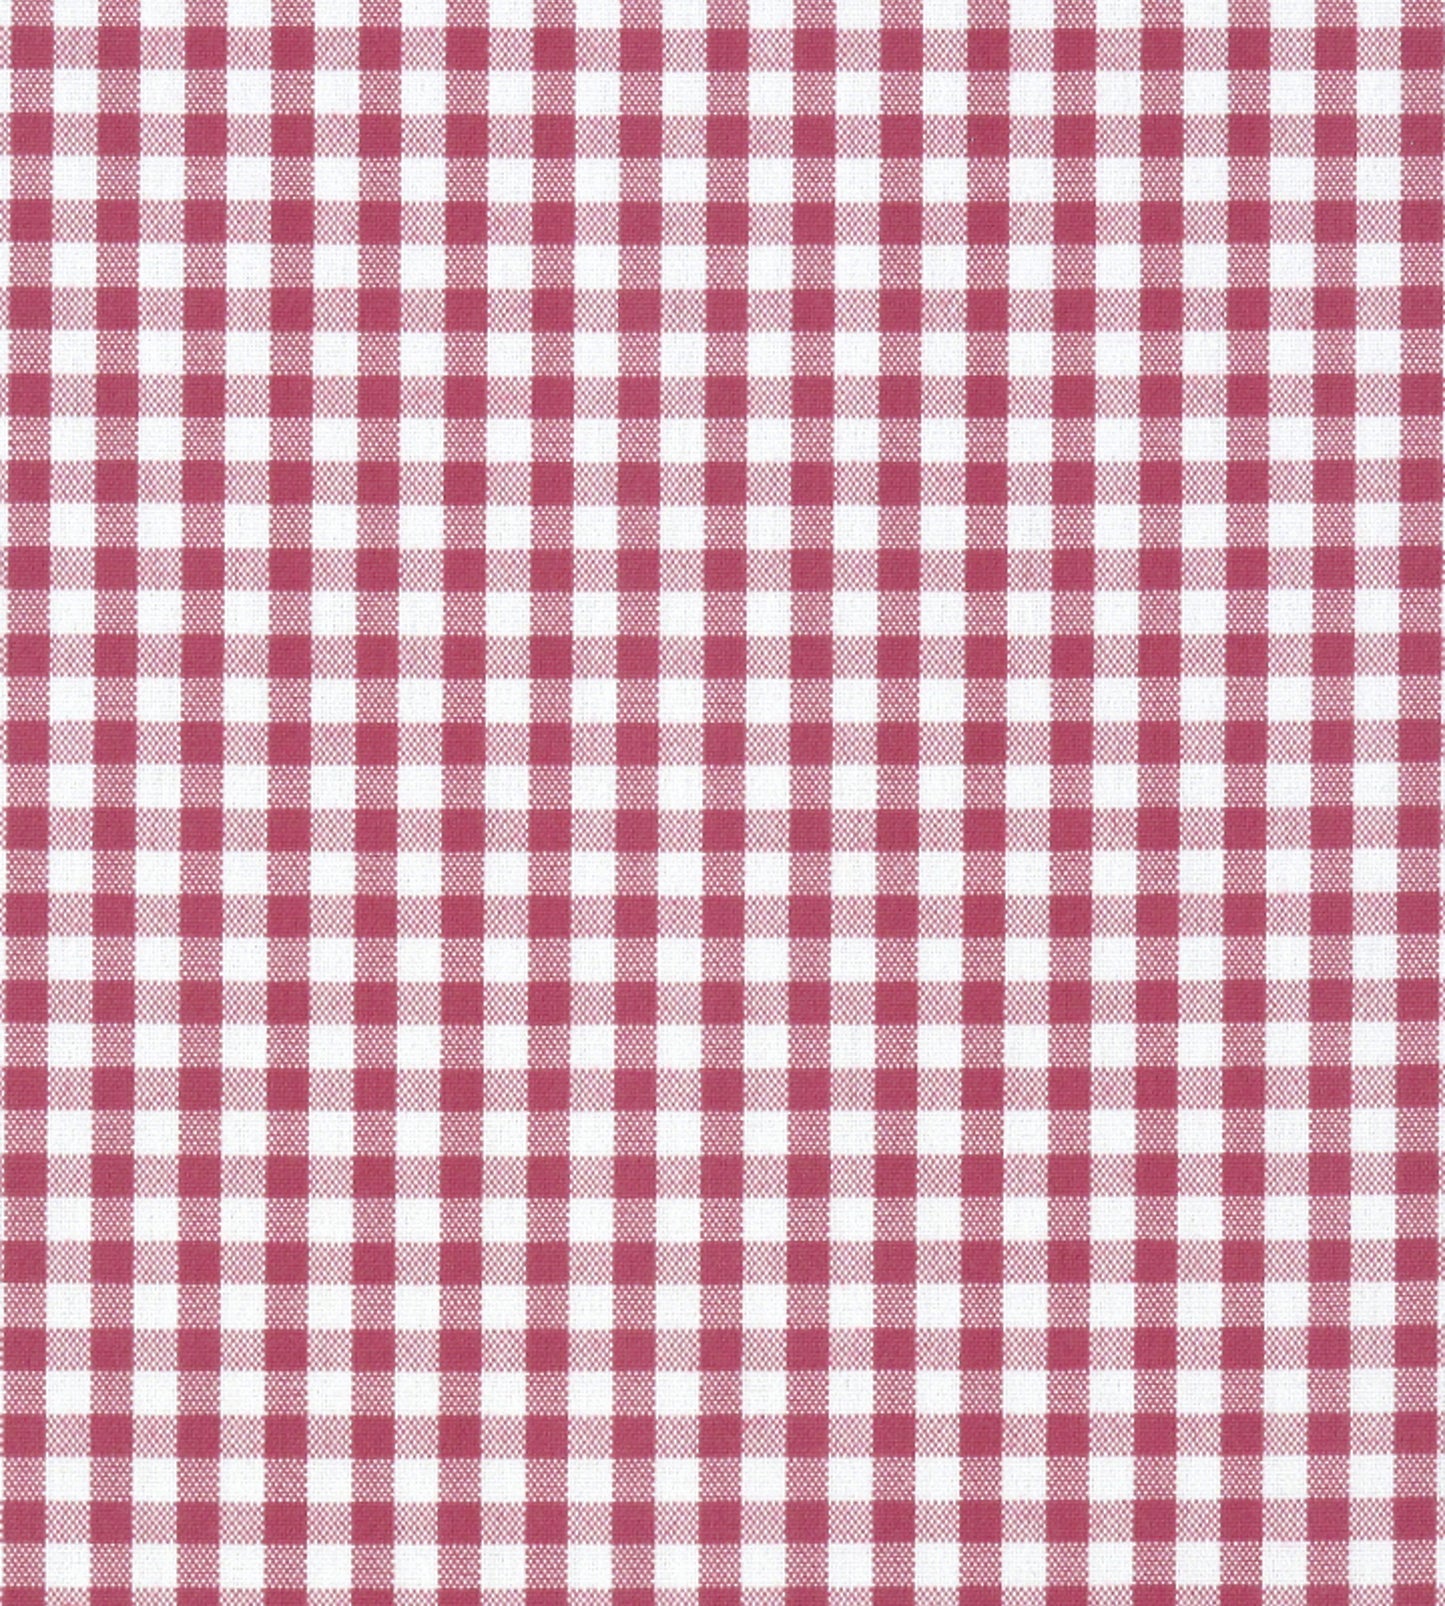 Purchase Old World Weavers Fabric Product F3 00093018, Poker Check Berry 1